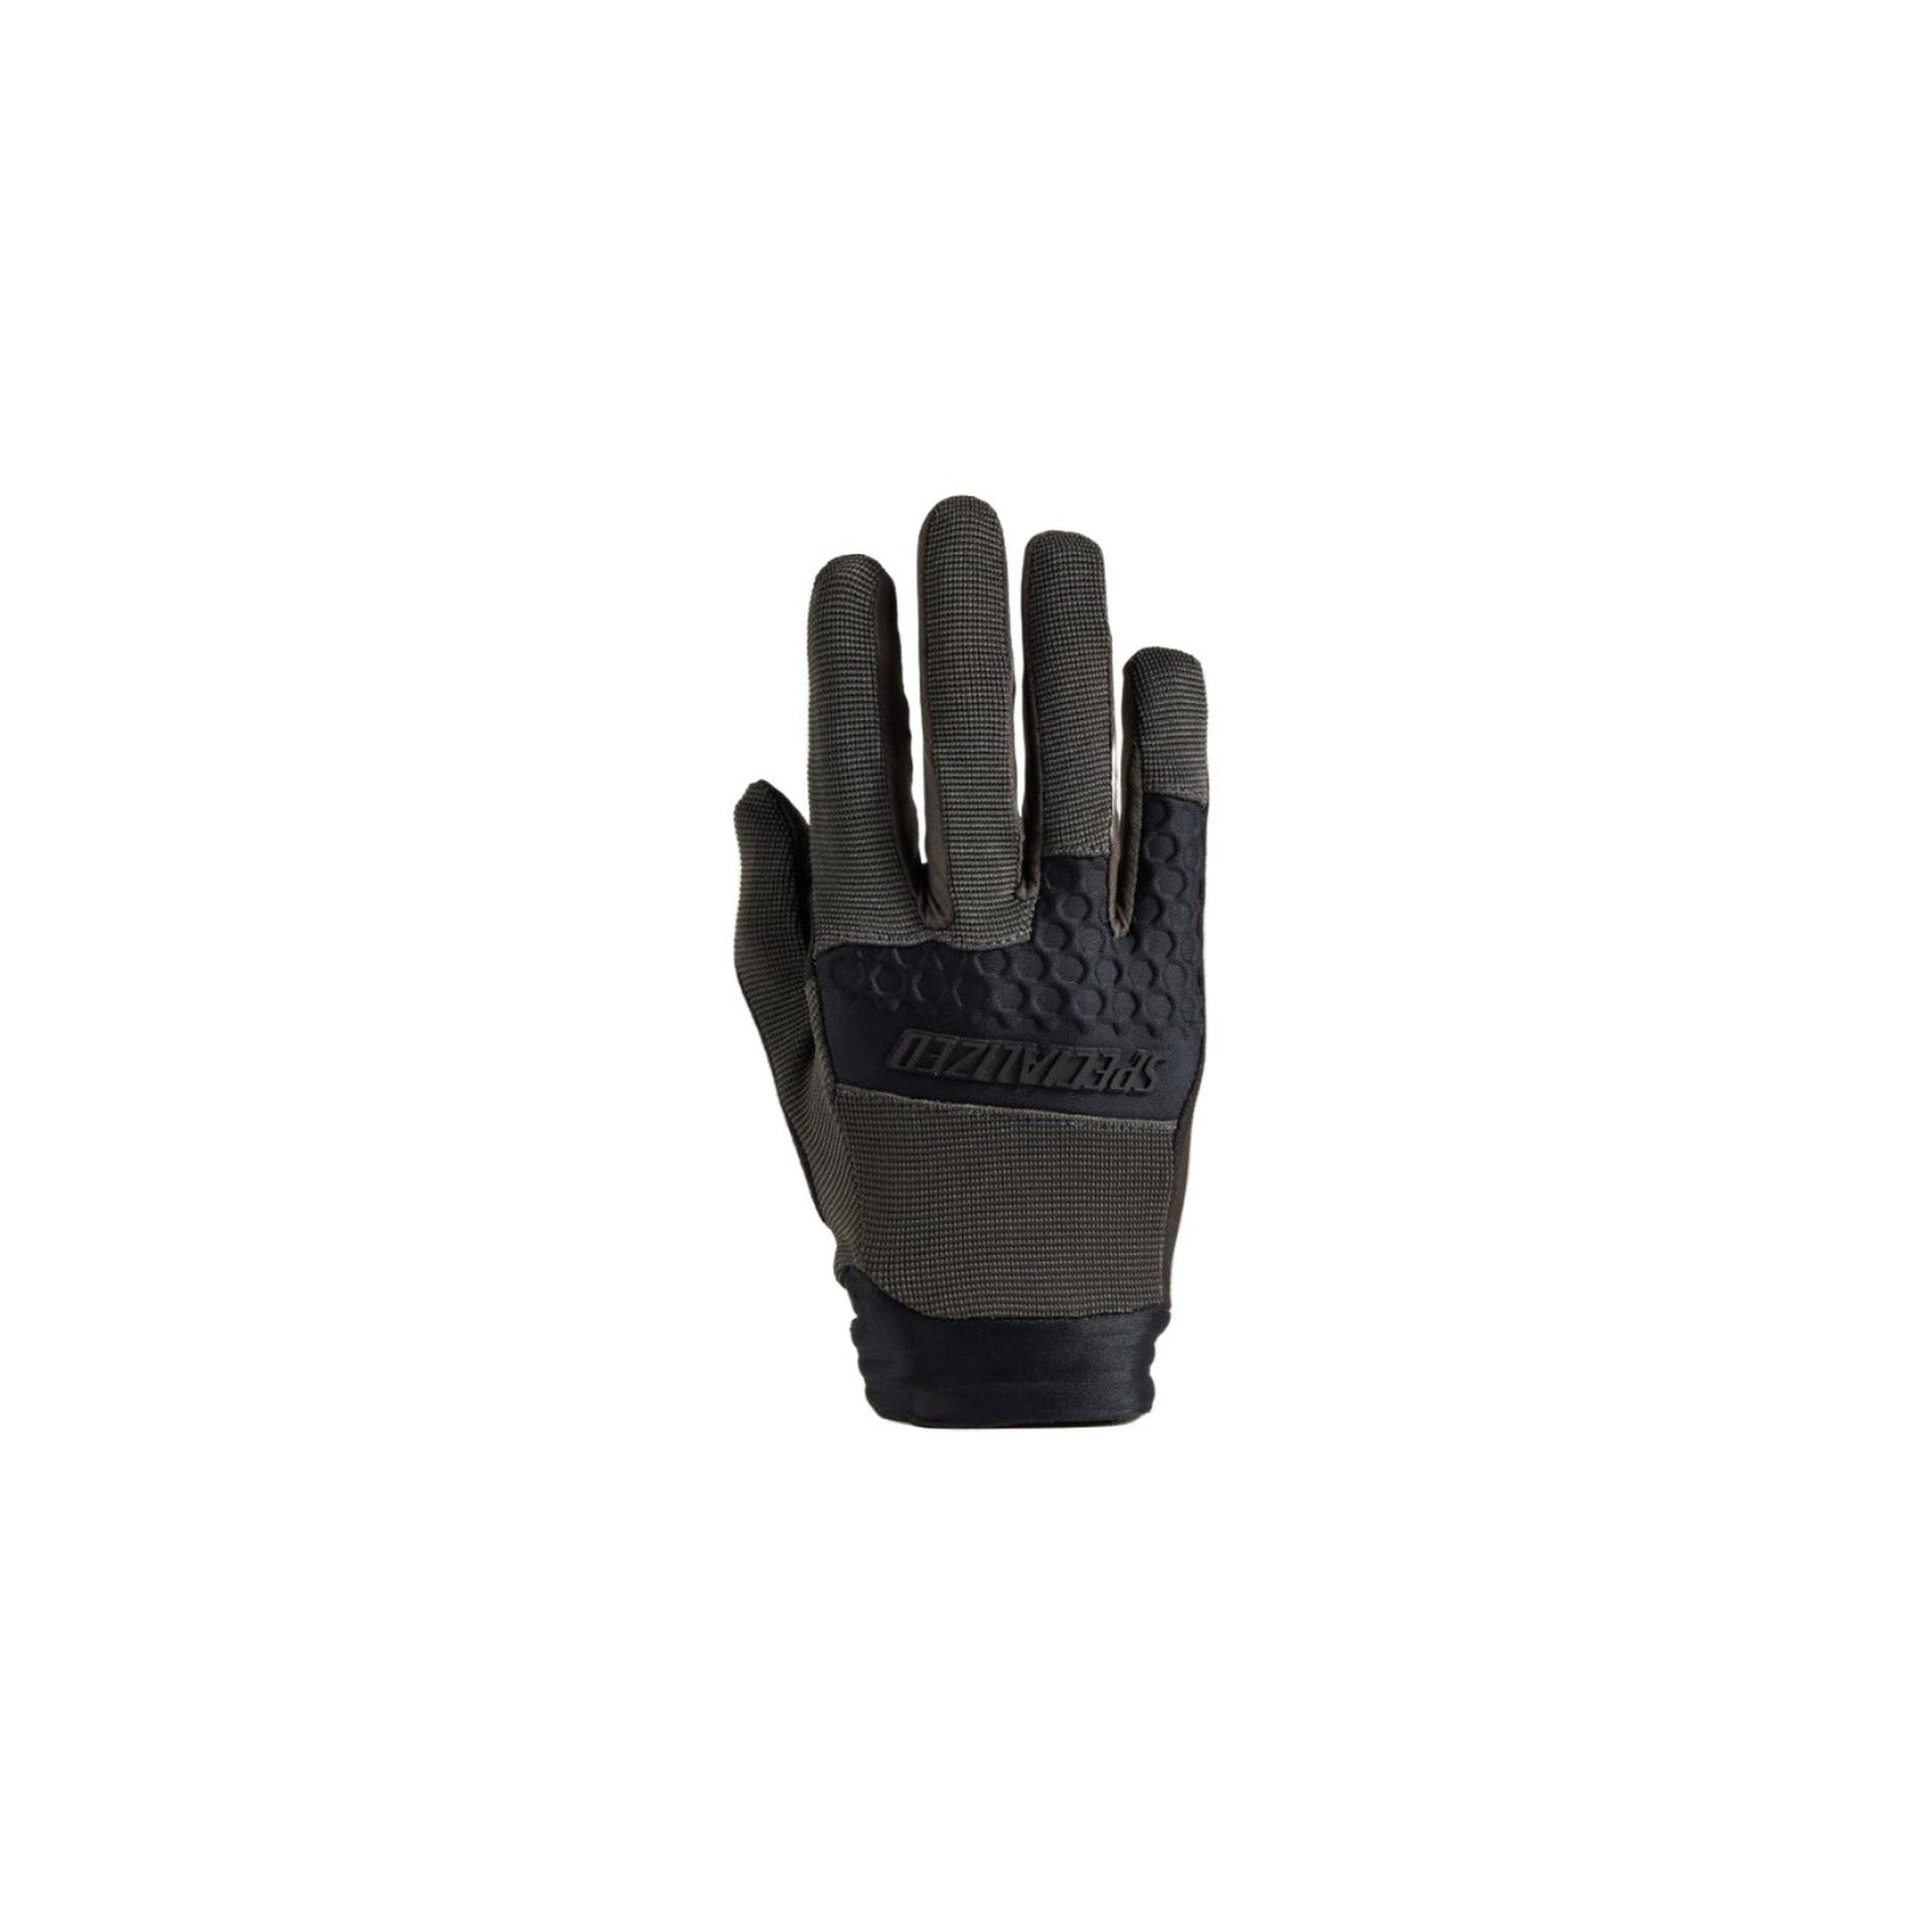 Men's Trail Shield Gloves | Complete Cyclist - Our Trail Shield Gloves are the most padded in our new line. These gloves feature a conductive palm that keeps your hands comfortable on rough trails, but they